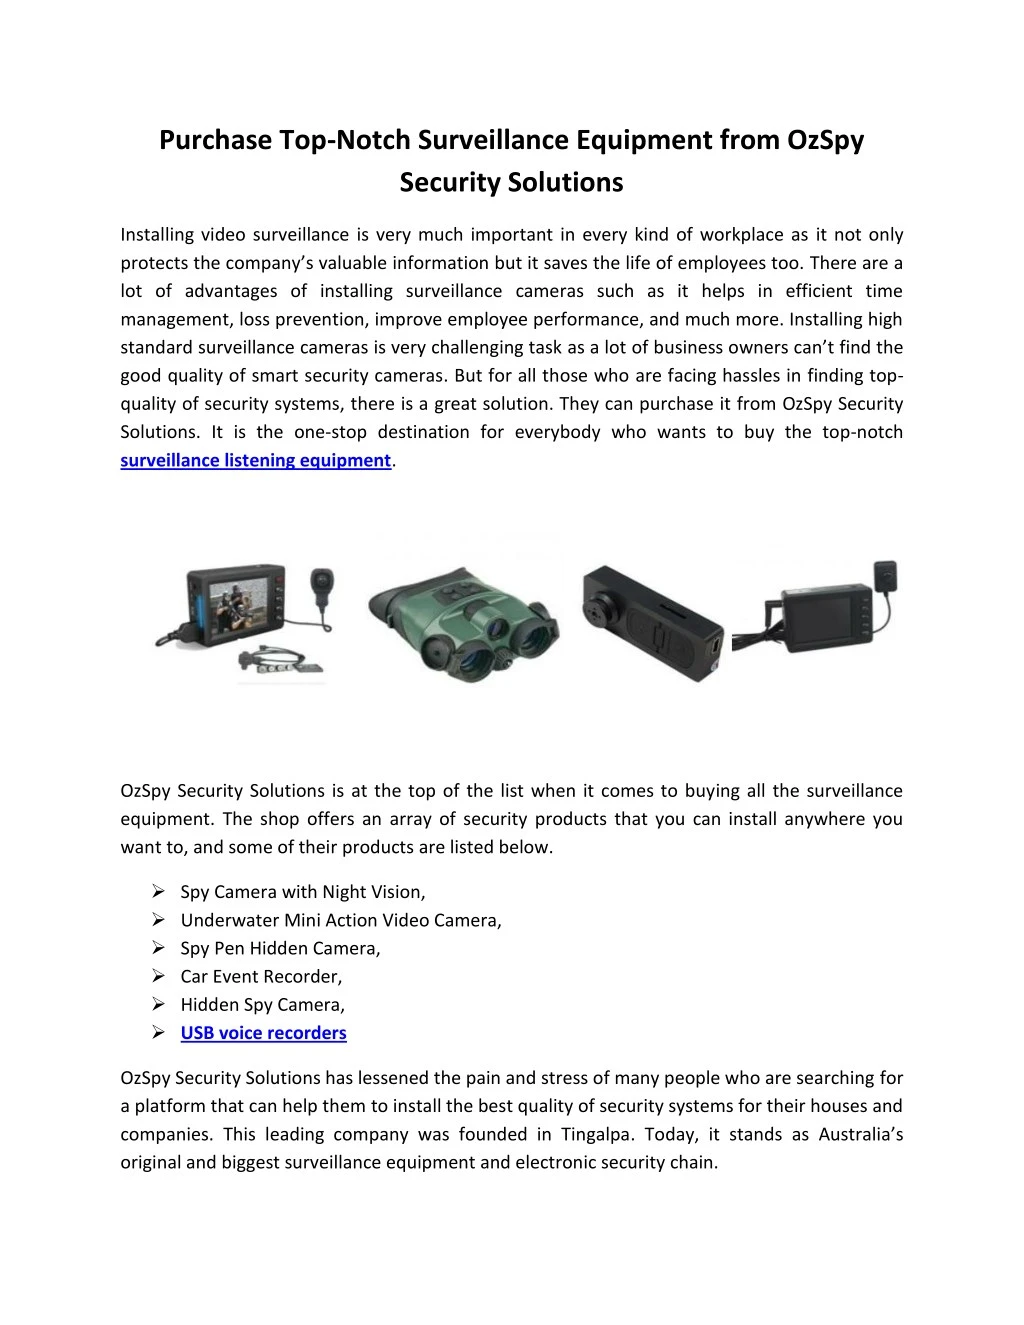 purchase top notch surveillance equipment from